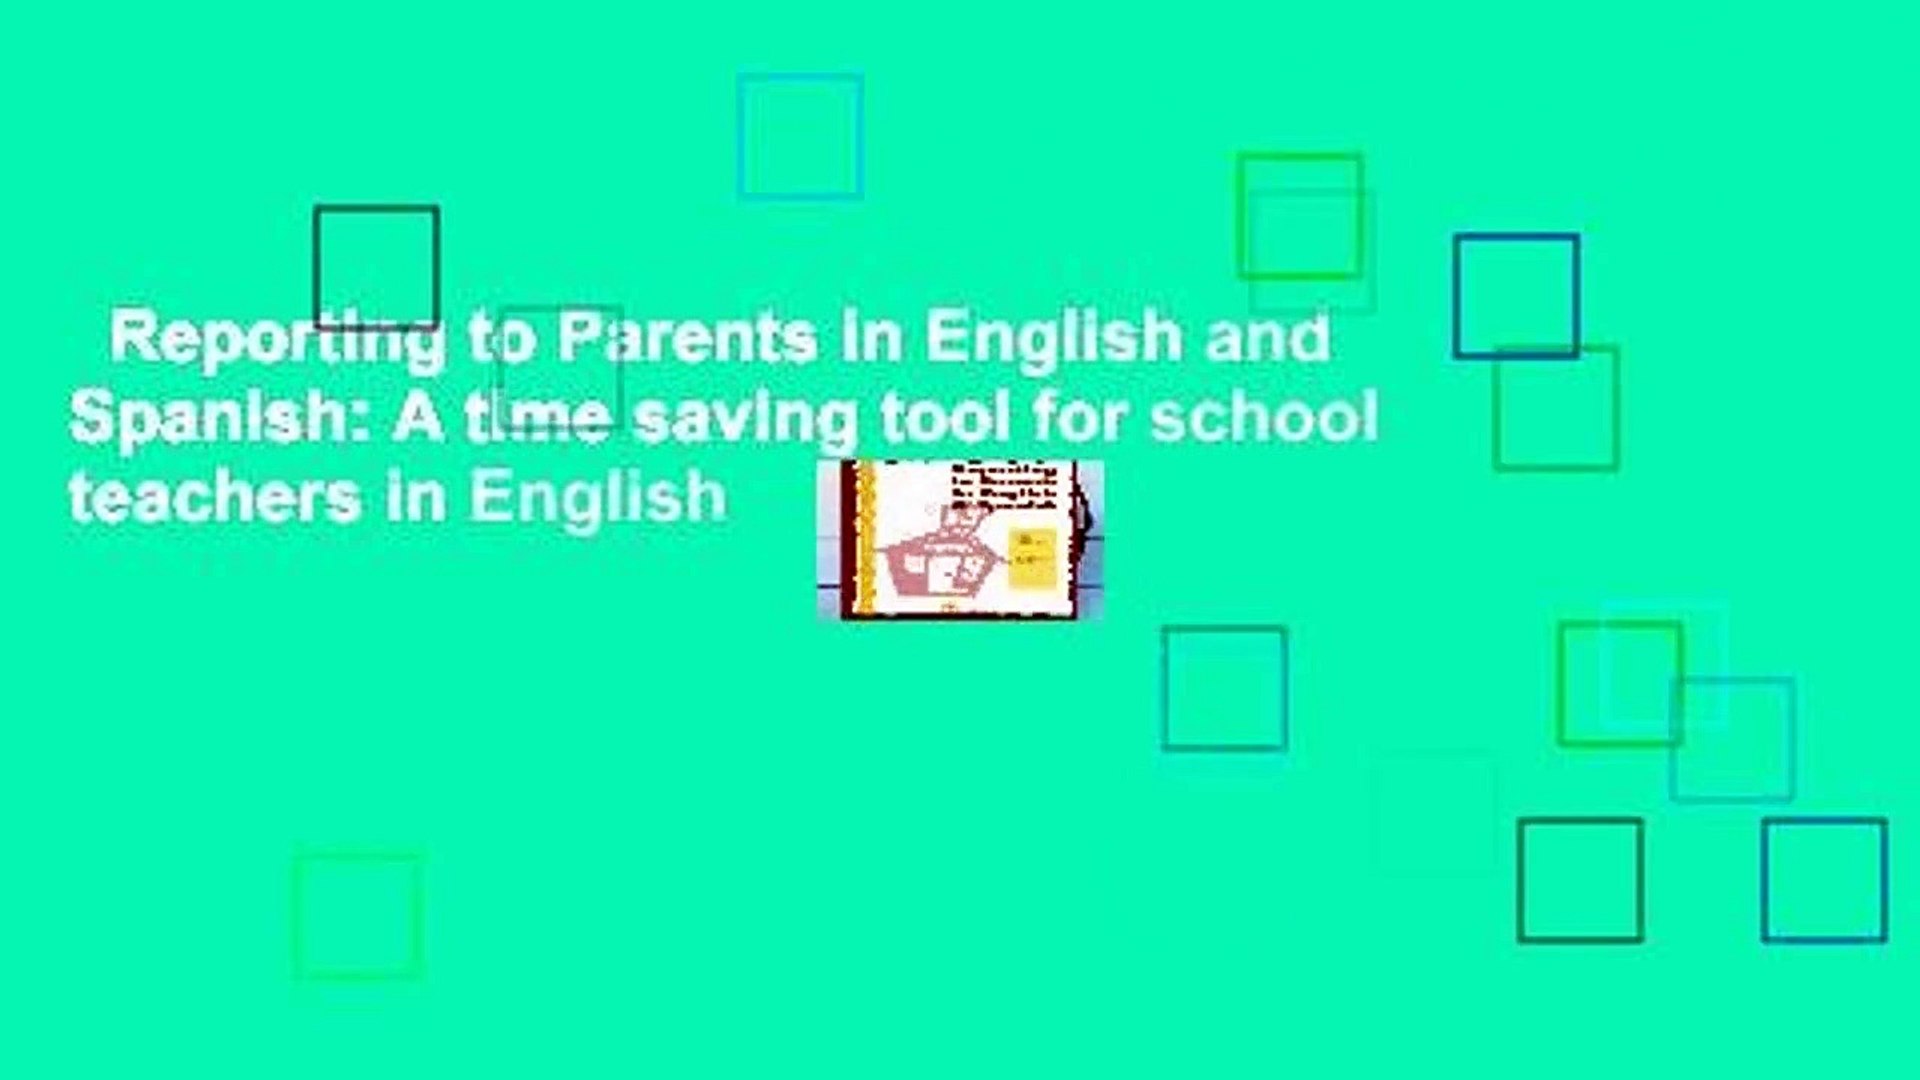 Reporting to Parents in English and Spanish: A time saving tool for school teachers in English